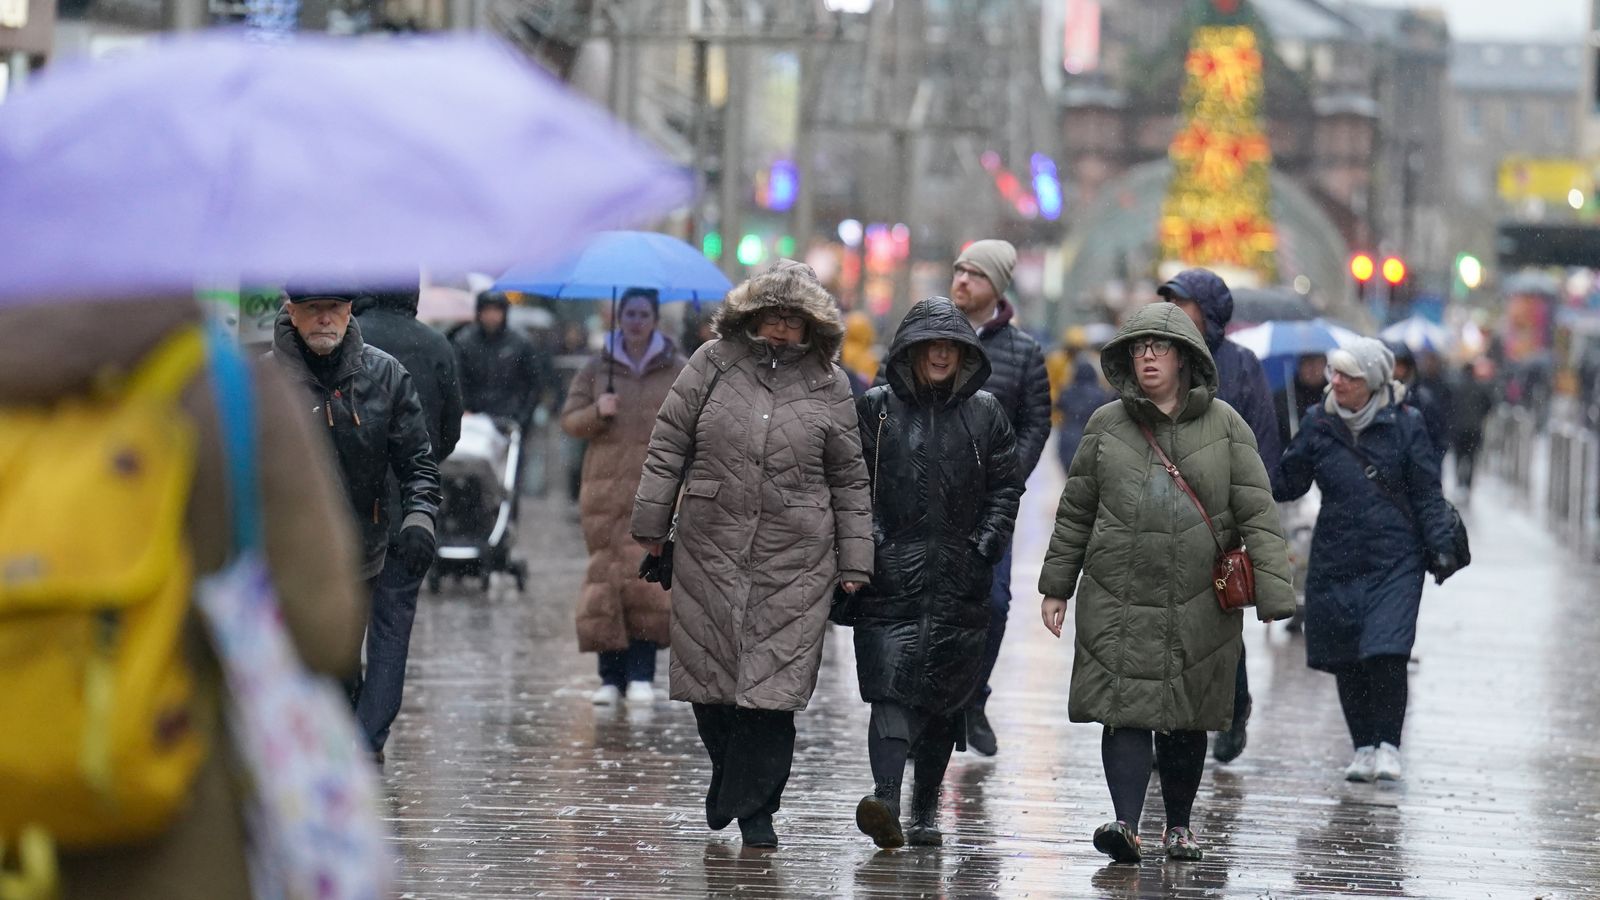 UK weather: Unsettled conditions and yellow warnings for wind and rain issued in days after Christmas